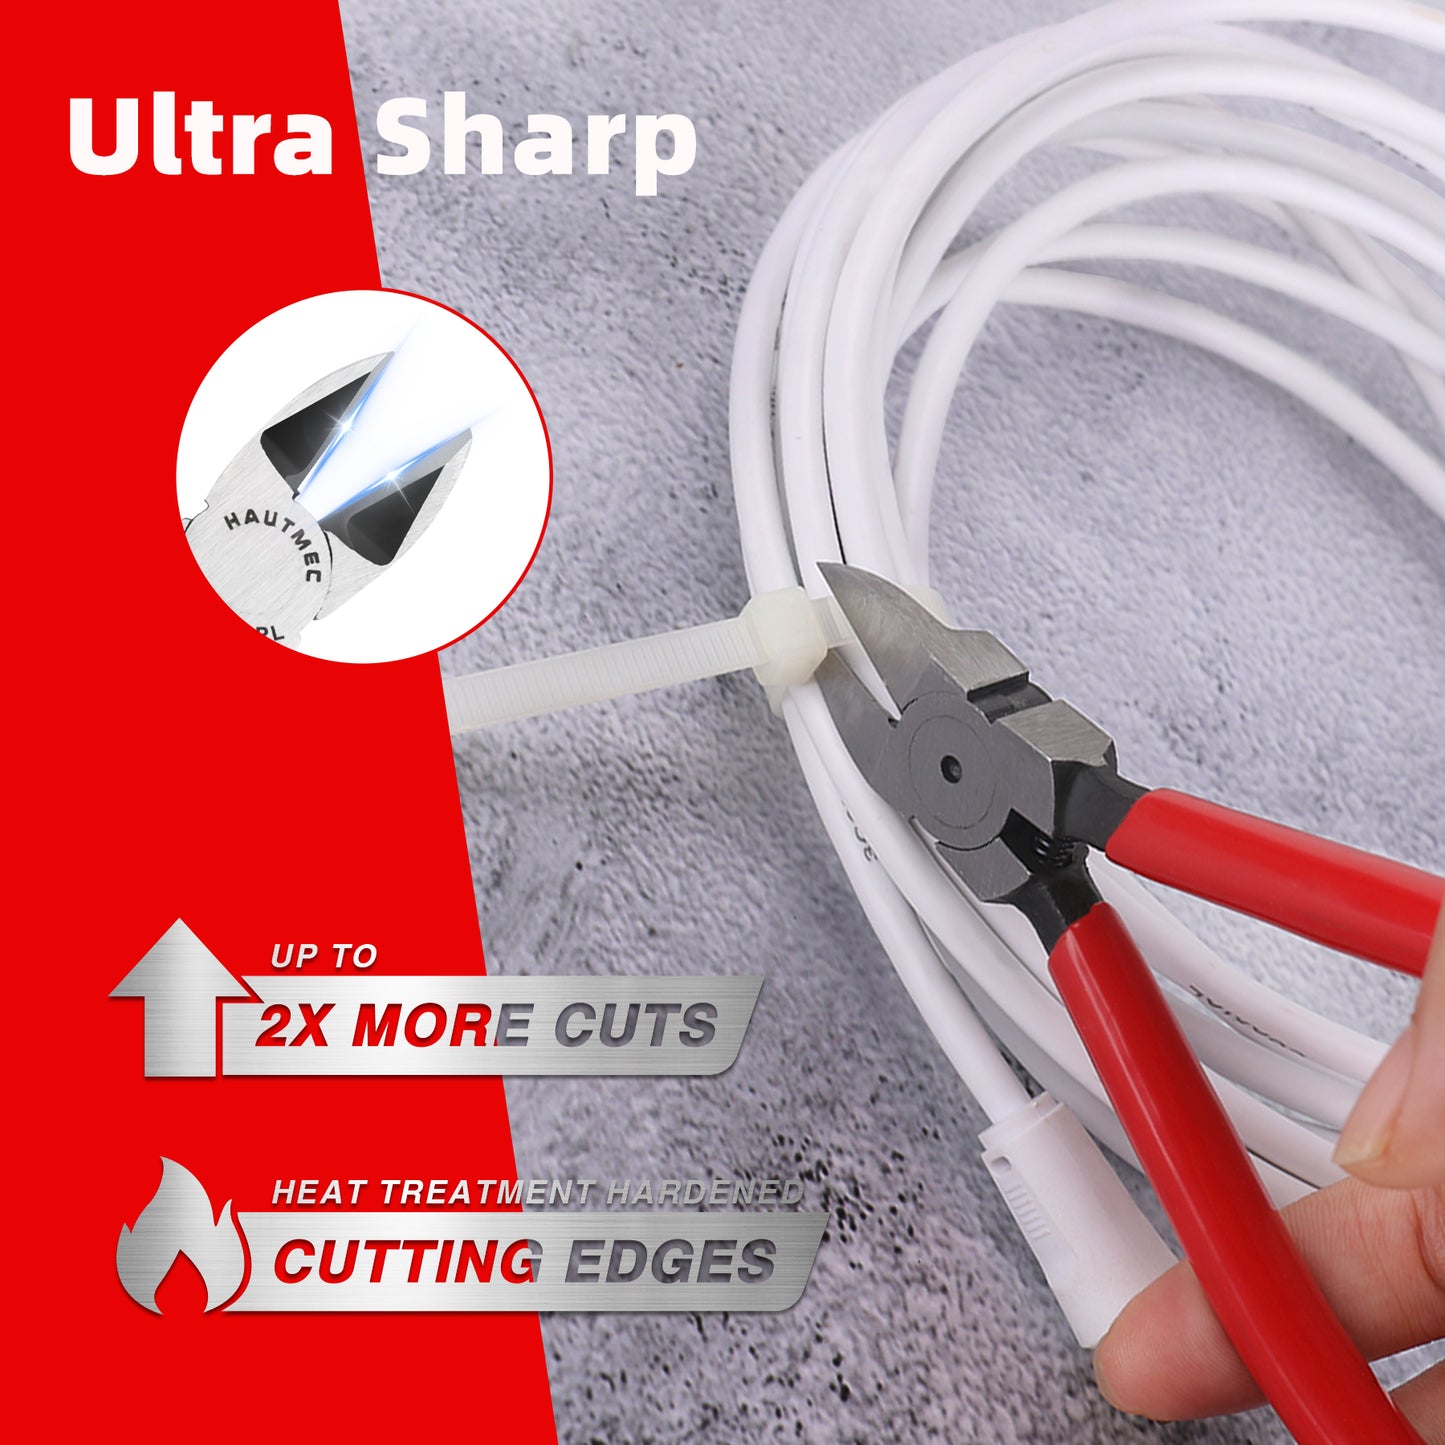 HAUTMEC 6" Flush Cut Pliers Ultra Sharp Wire Cutters 2PCS with Spring Loaded and Non-slip Grip, Ideal Wire Snips for Plastic, Soft Wire, Toy Model Kits, Jewelry Marking, Zip Ties, HT0318-2PC